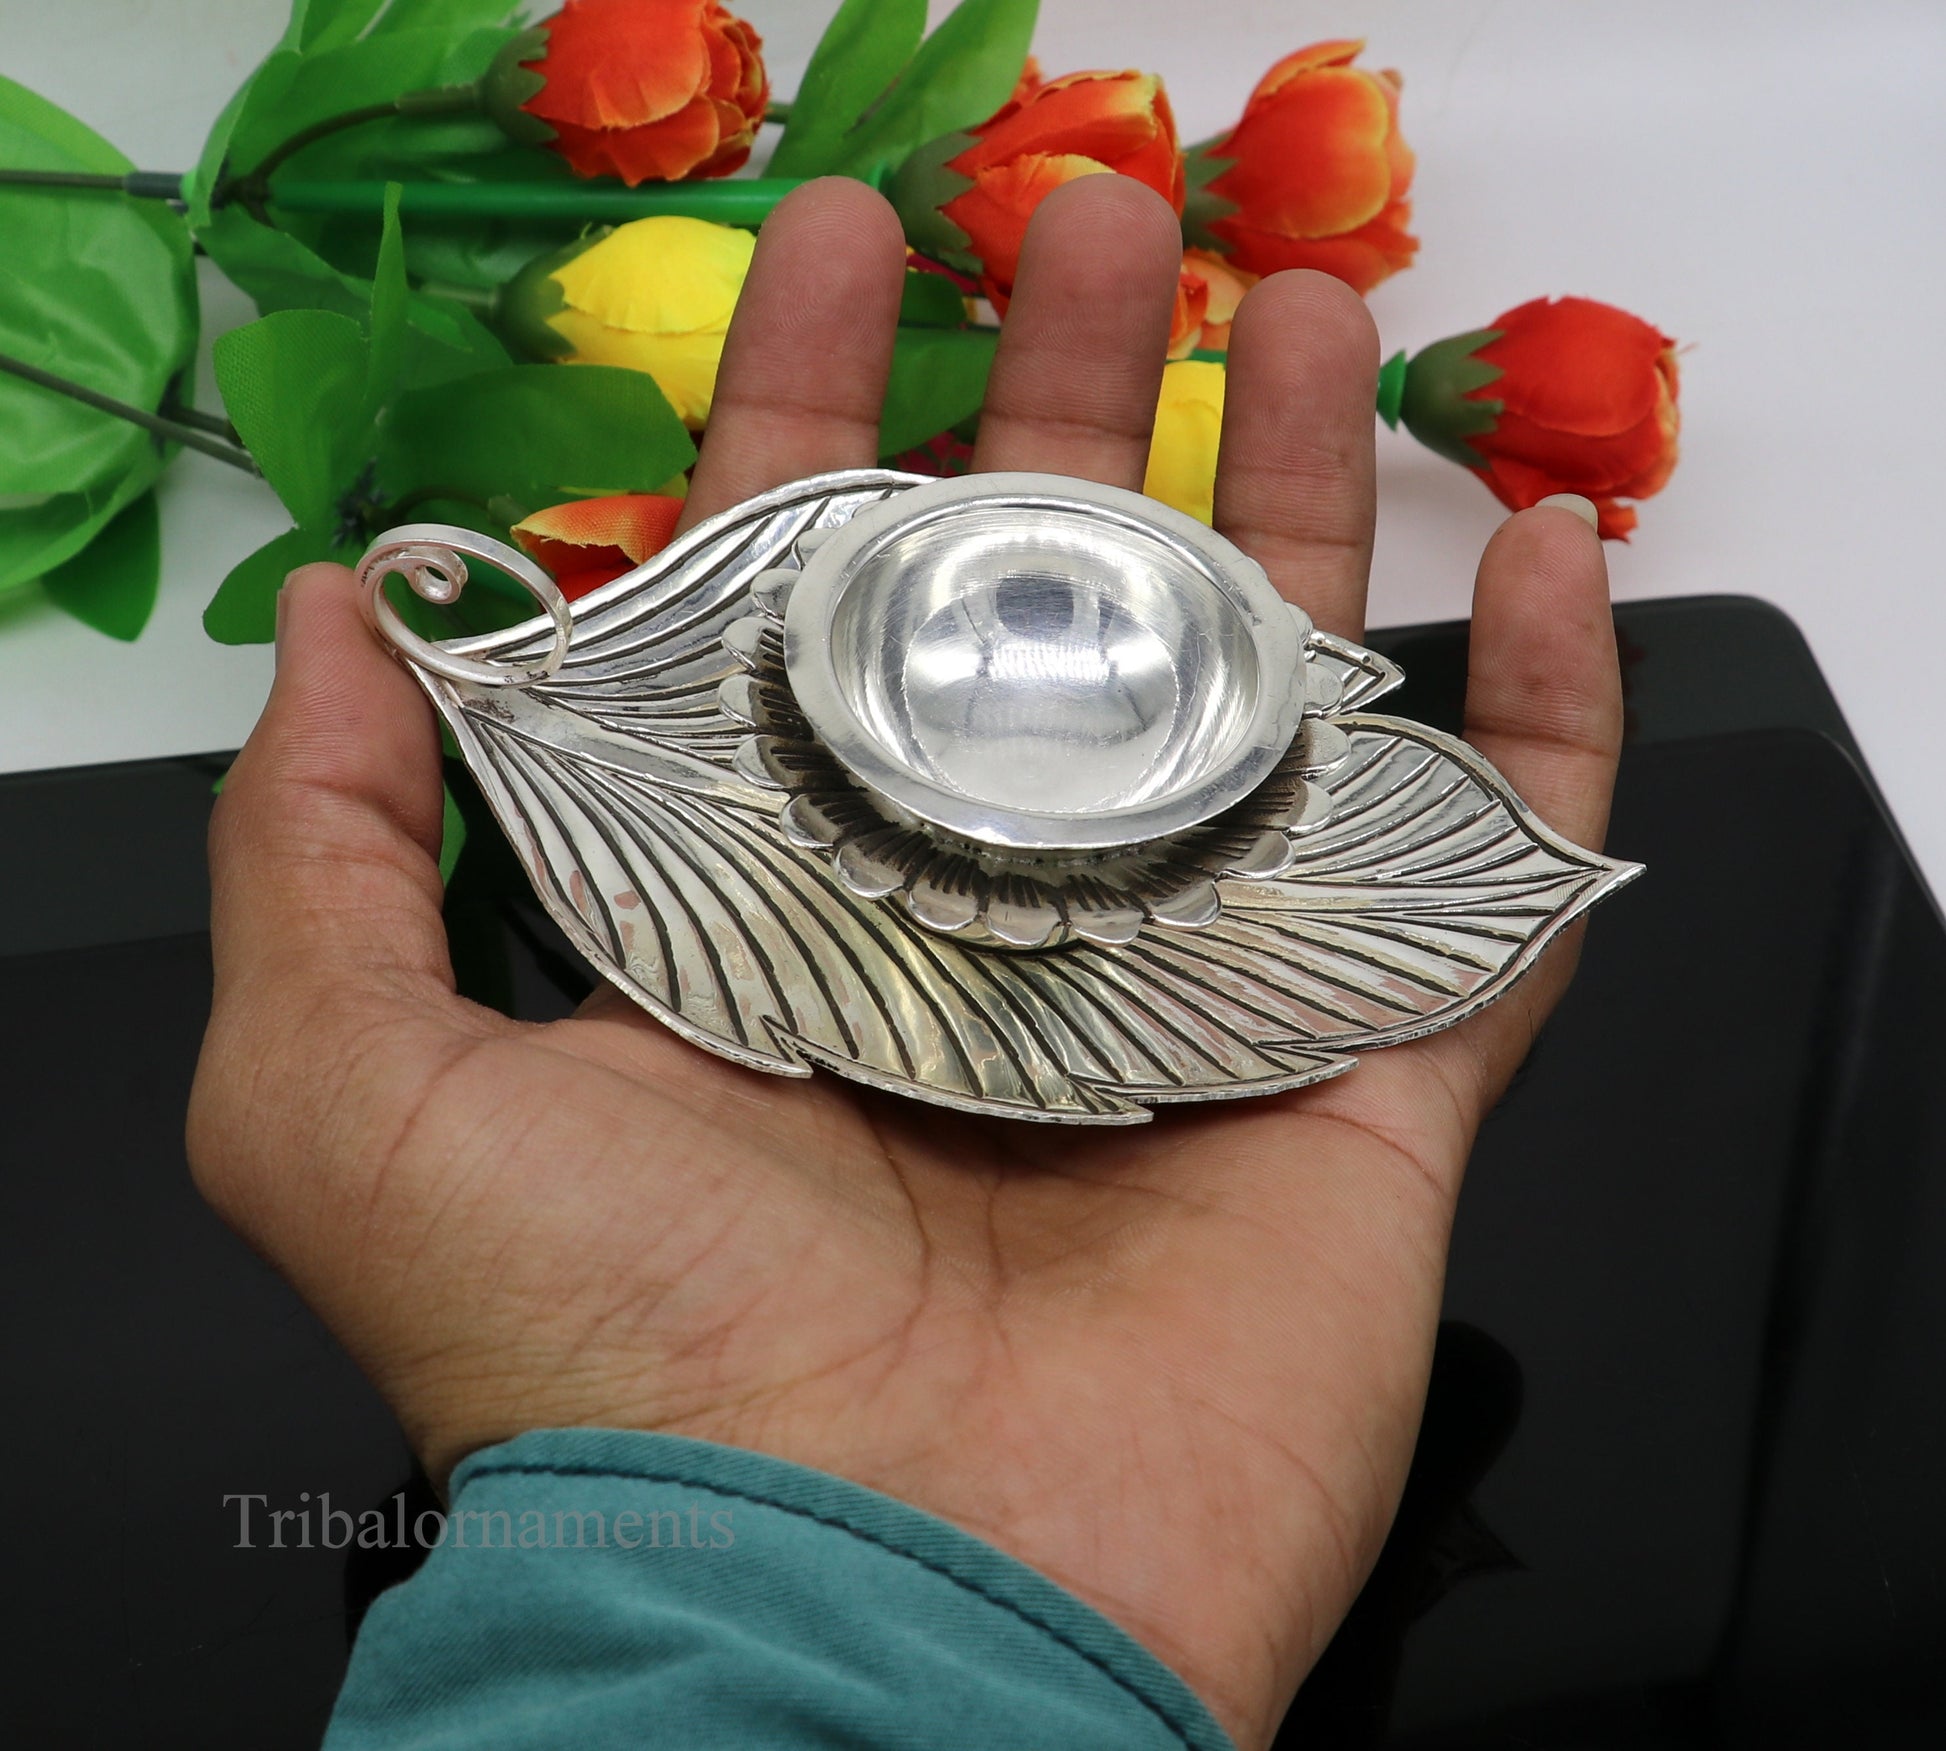 925 sterling silver Divine oil lamp, stunning tree leaf vintage design lamp, best gifting puja utensils or article from India su480 - TRIBAL ORNAMENTS